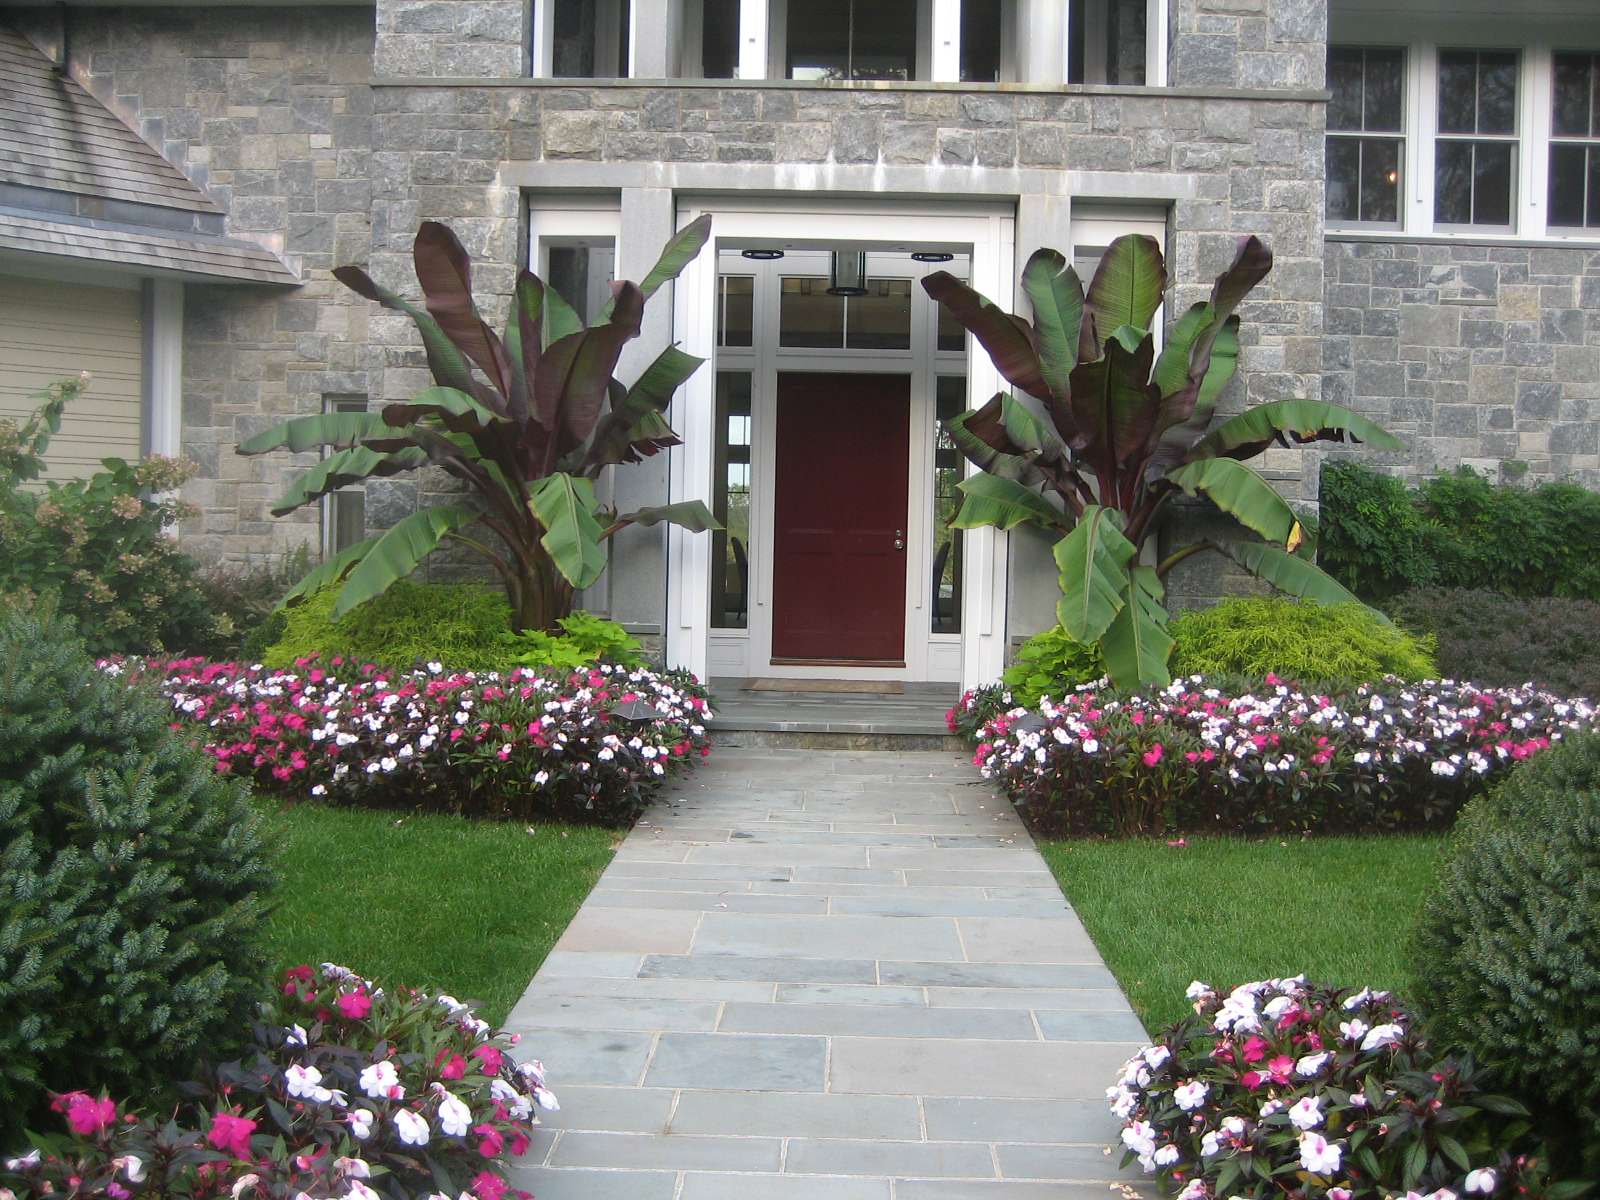 Grand Entrances to the House